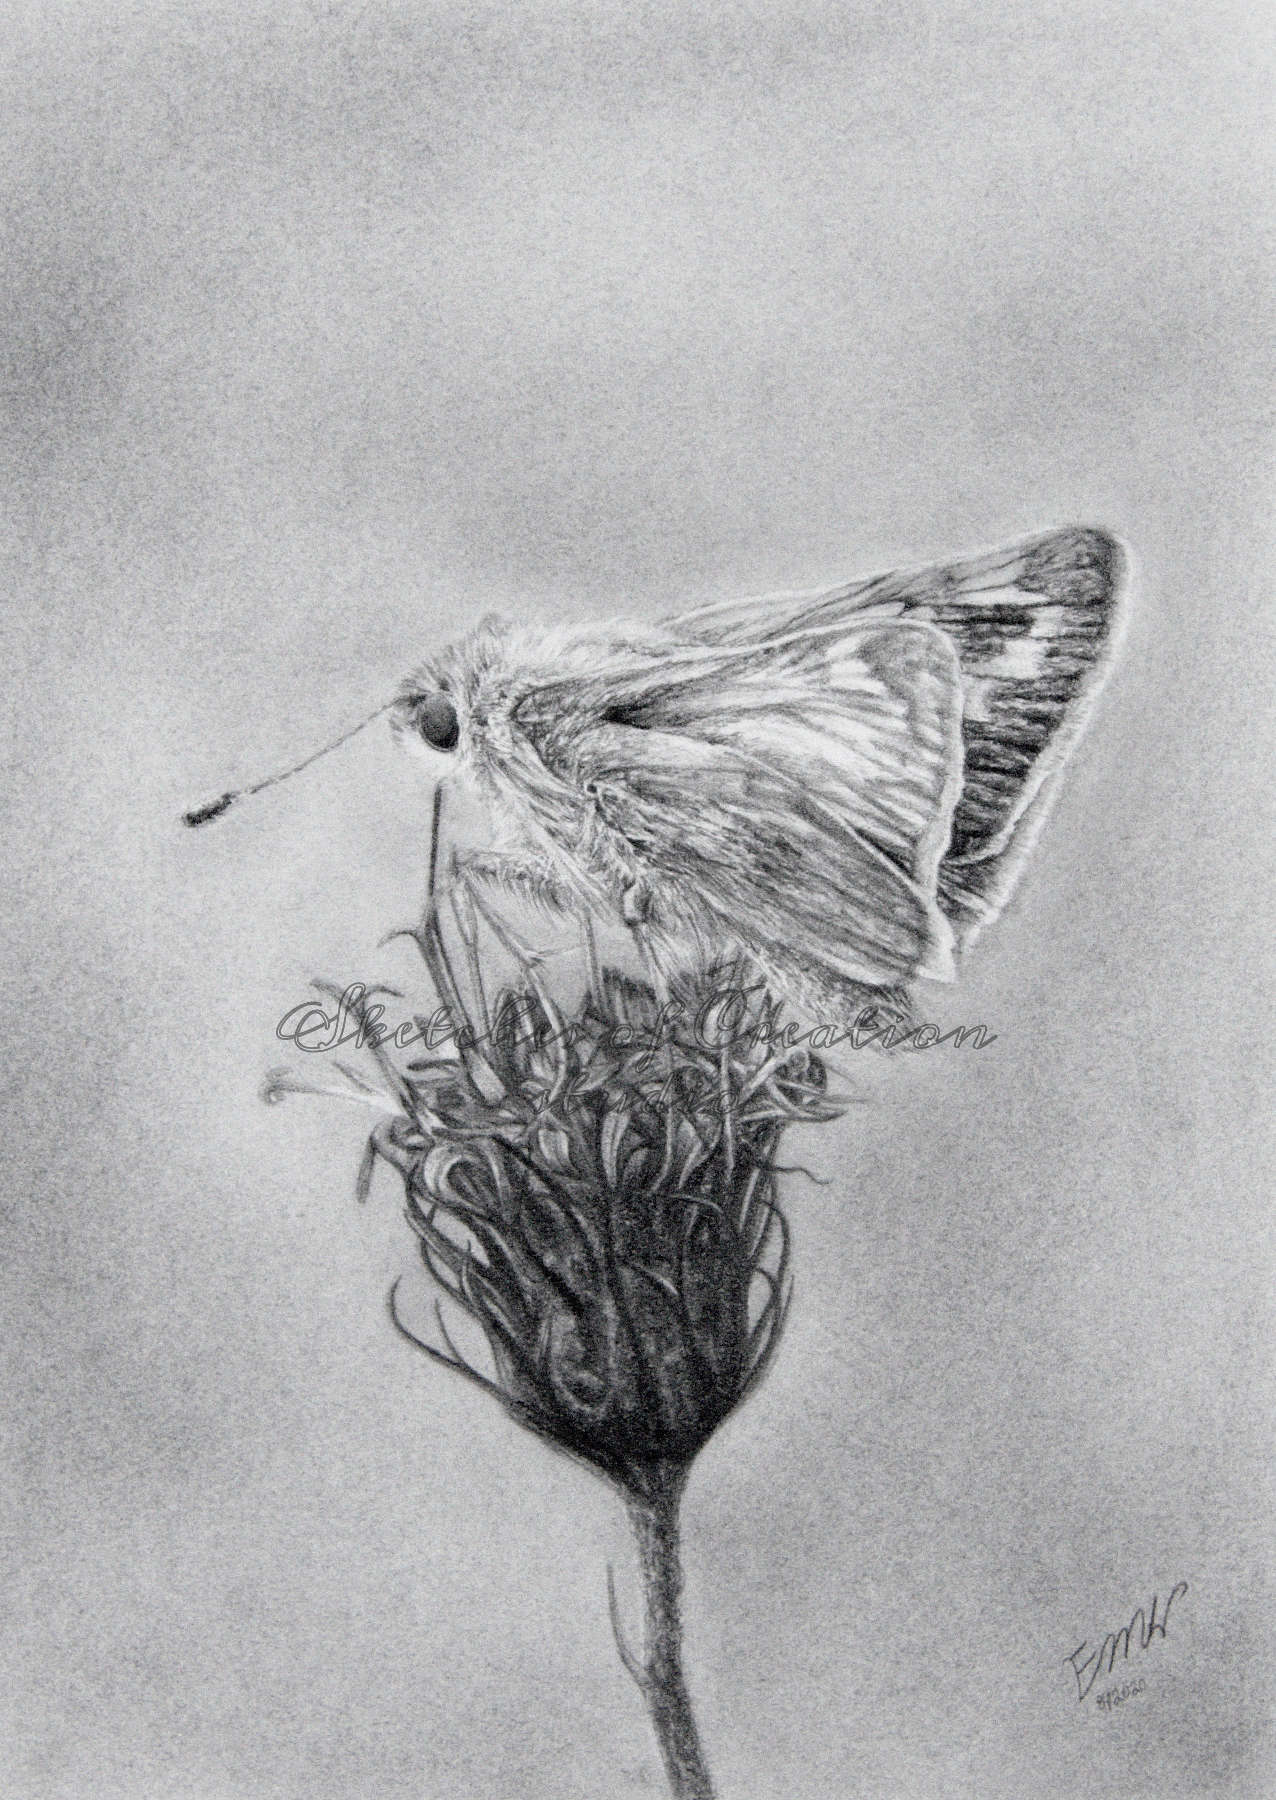 'Skipper' a drawing of a Skipper butterfly on Ironweed. Approximately 5x7 inches